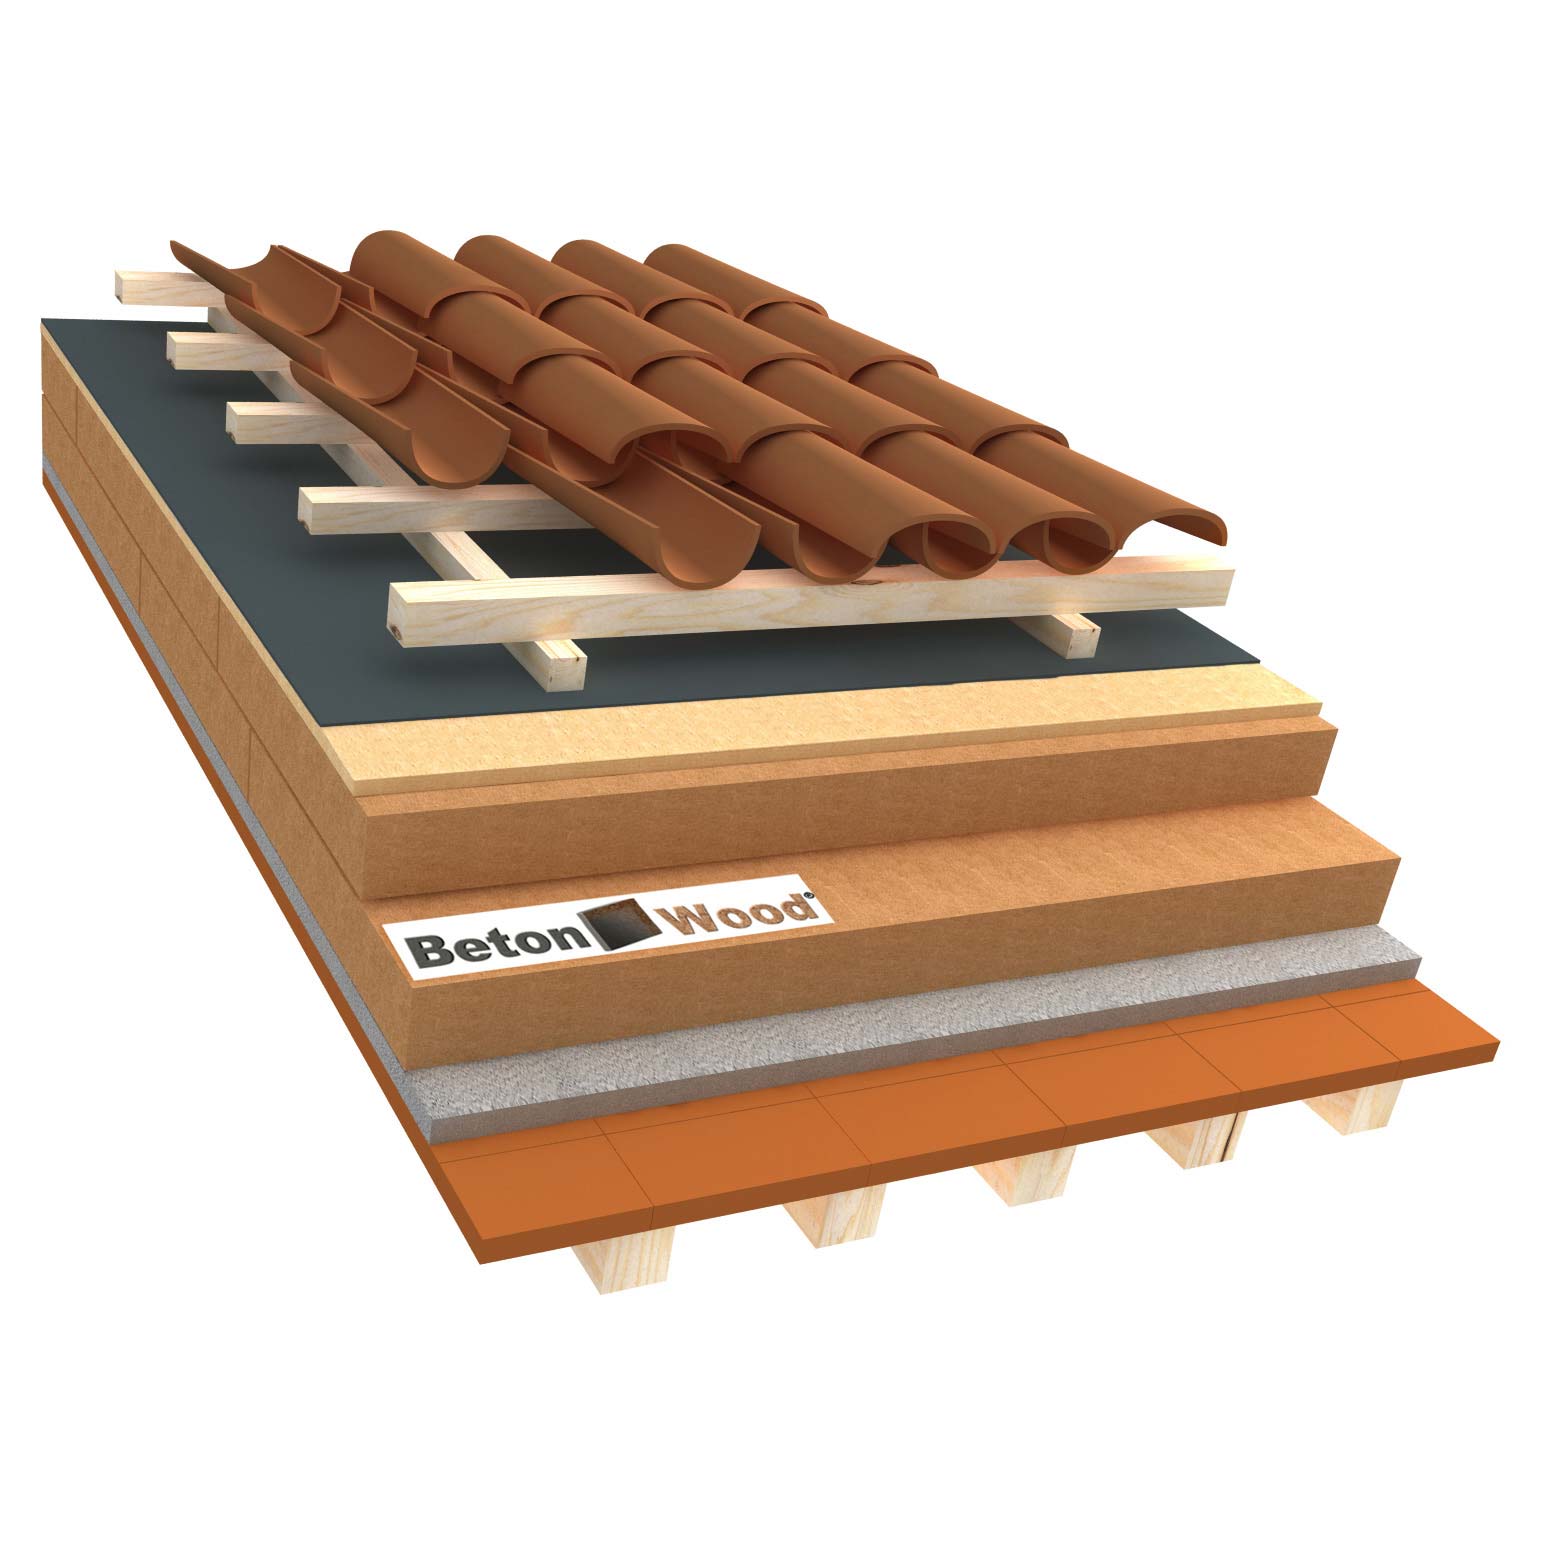 Ventilated roof with wood fiber Isorel and Universal on terracotta tiles